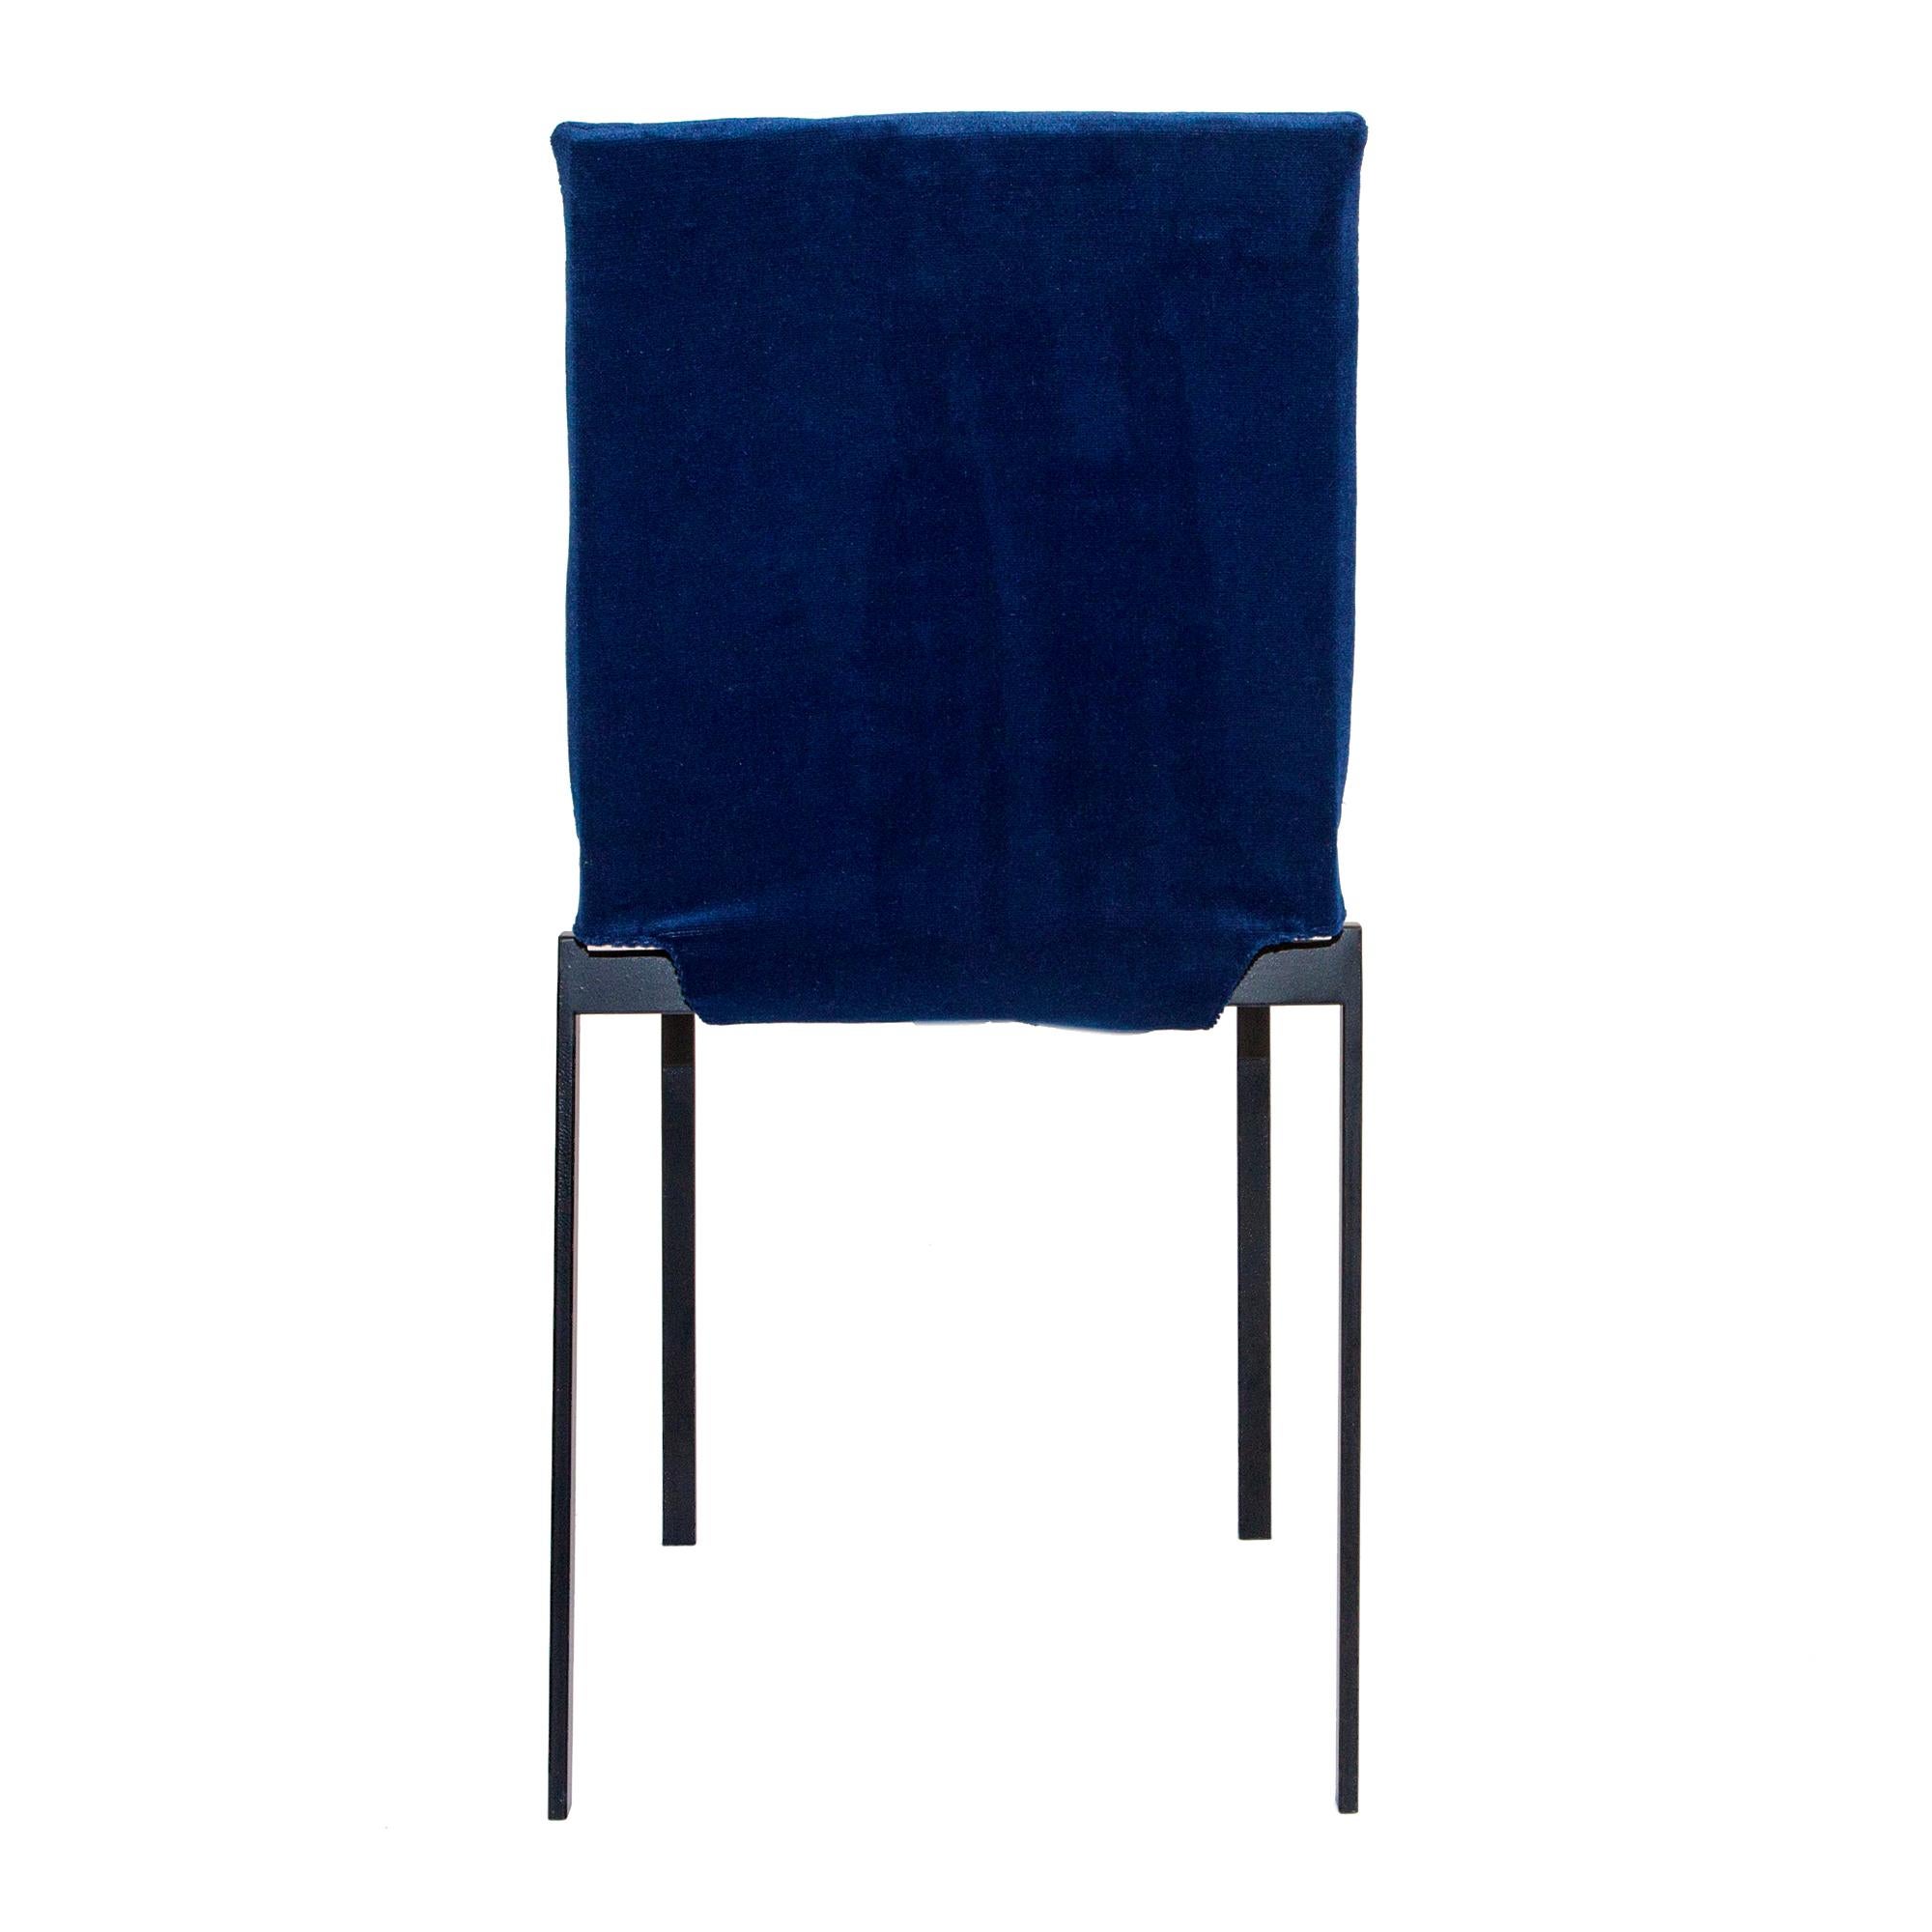 Italian Contemporary Tanit Soft Chair with Blue Velvet Cover For Sale